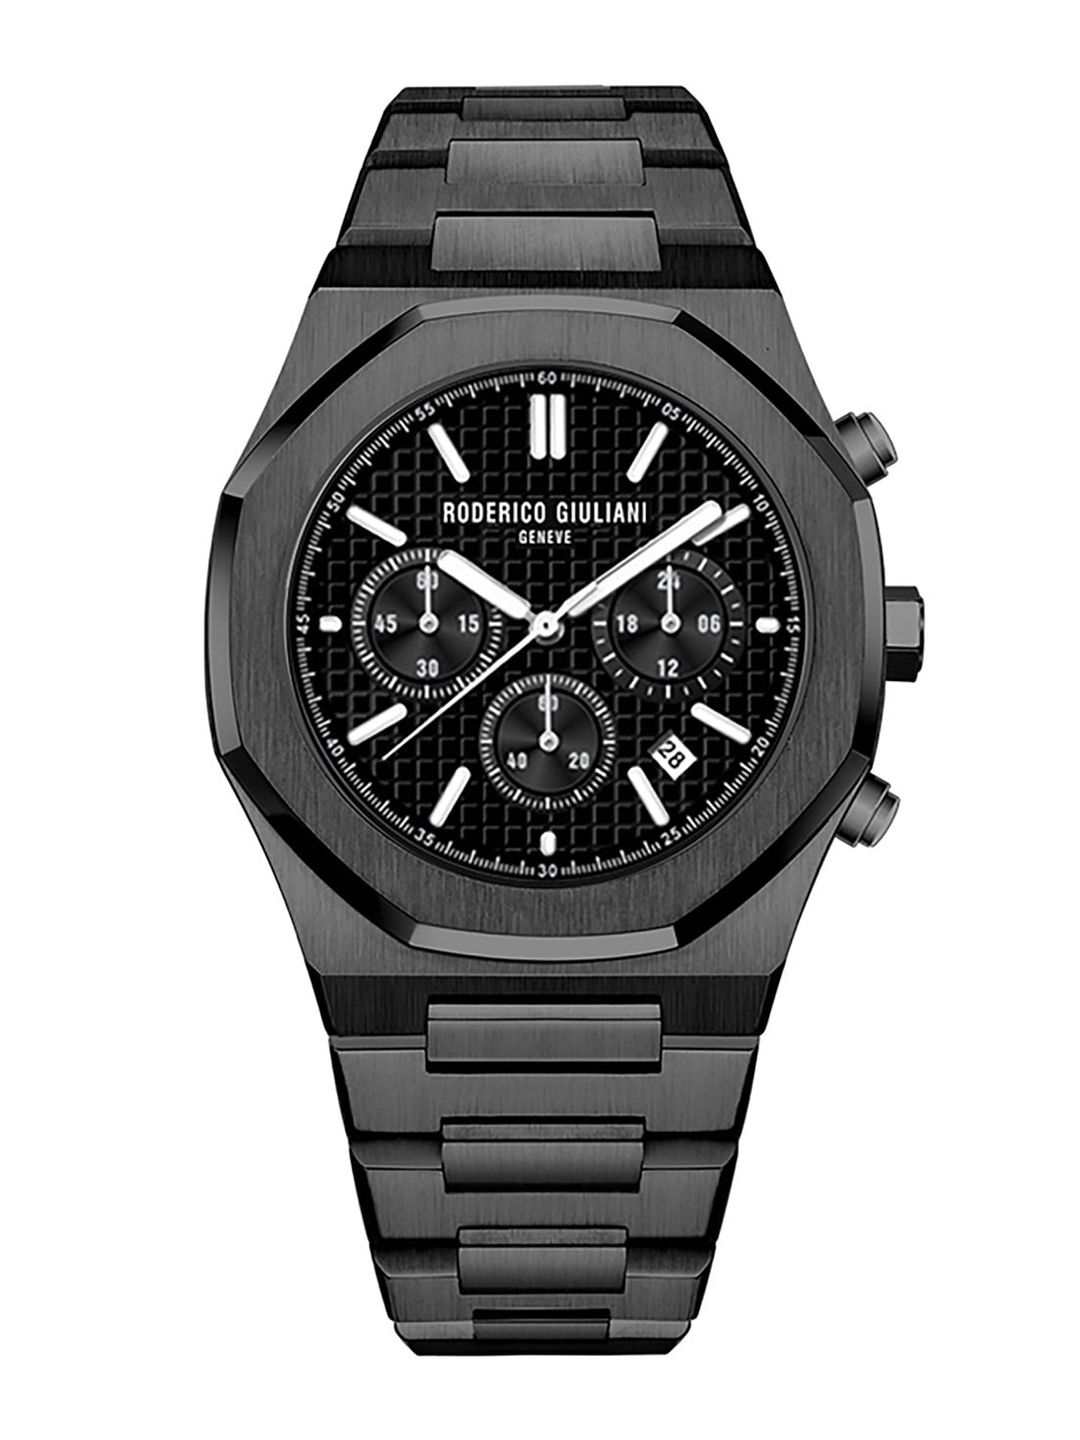 RODERICO GIULIANI Unisex Black Dial & Black Stainless Steel Straps Analogue Chronograph Watch Price in India